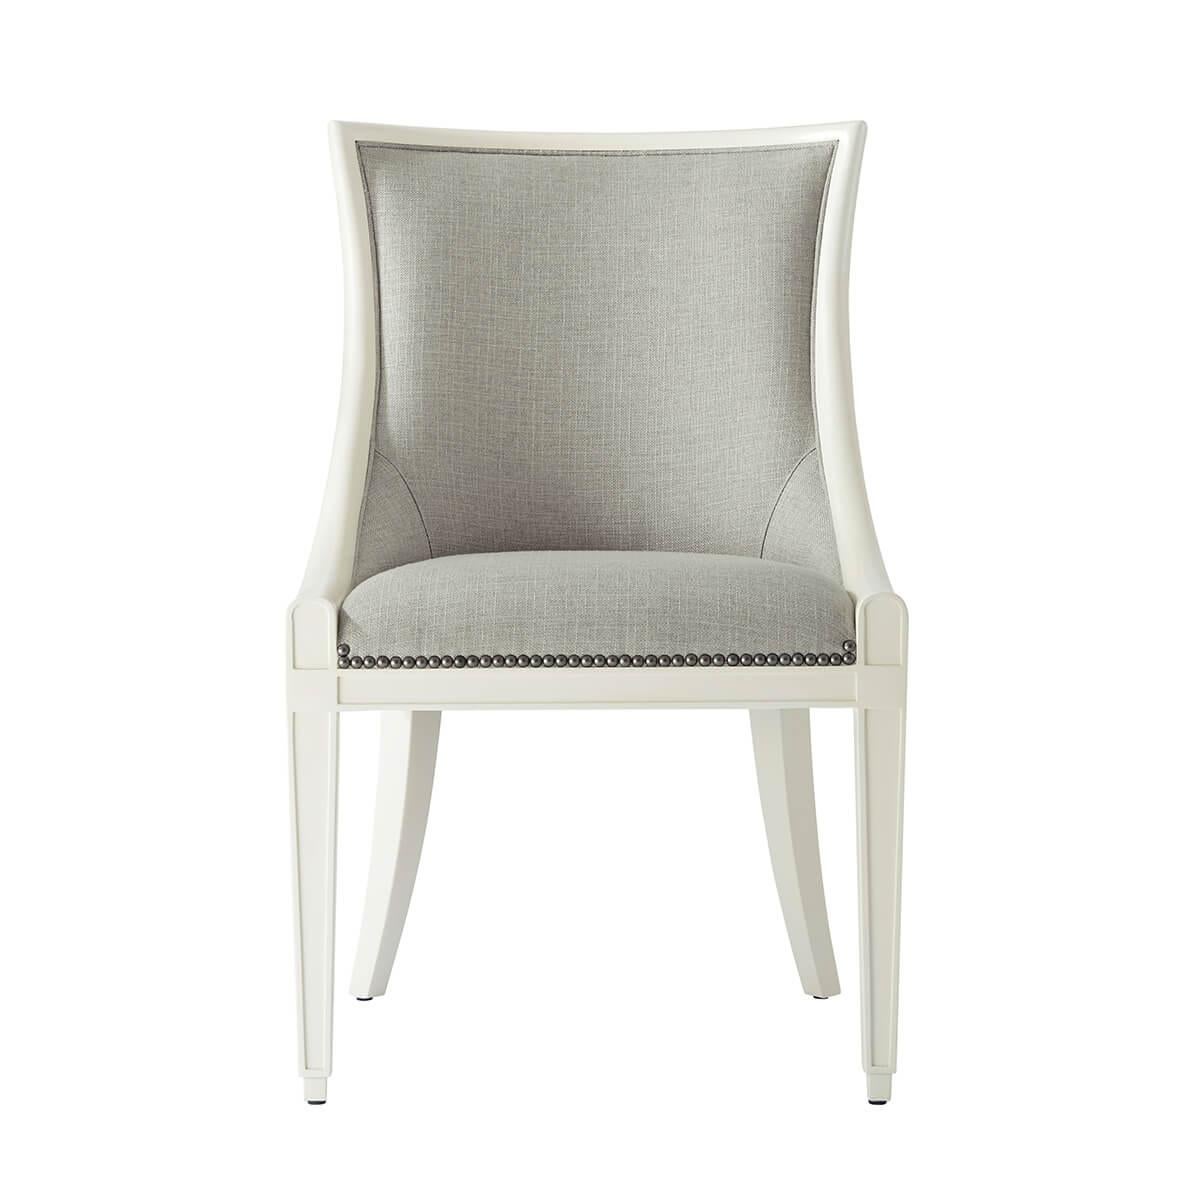 lacquered in an ivory finish, upholstered in a performance fabric is with curved scoop padded backrest, above a tight upholstered seat, raised on tapered legs, and finished with antiqued steel nailheads.

Dimensions: 21